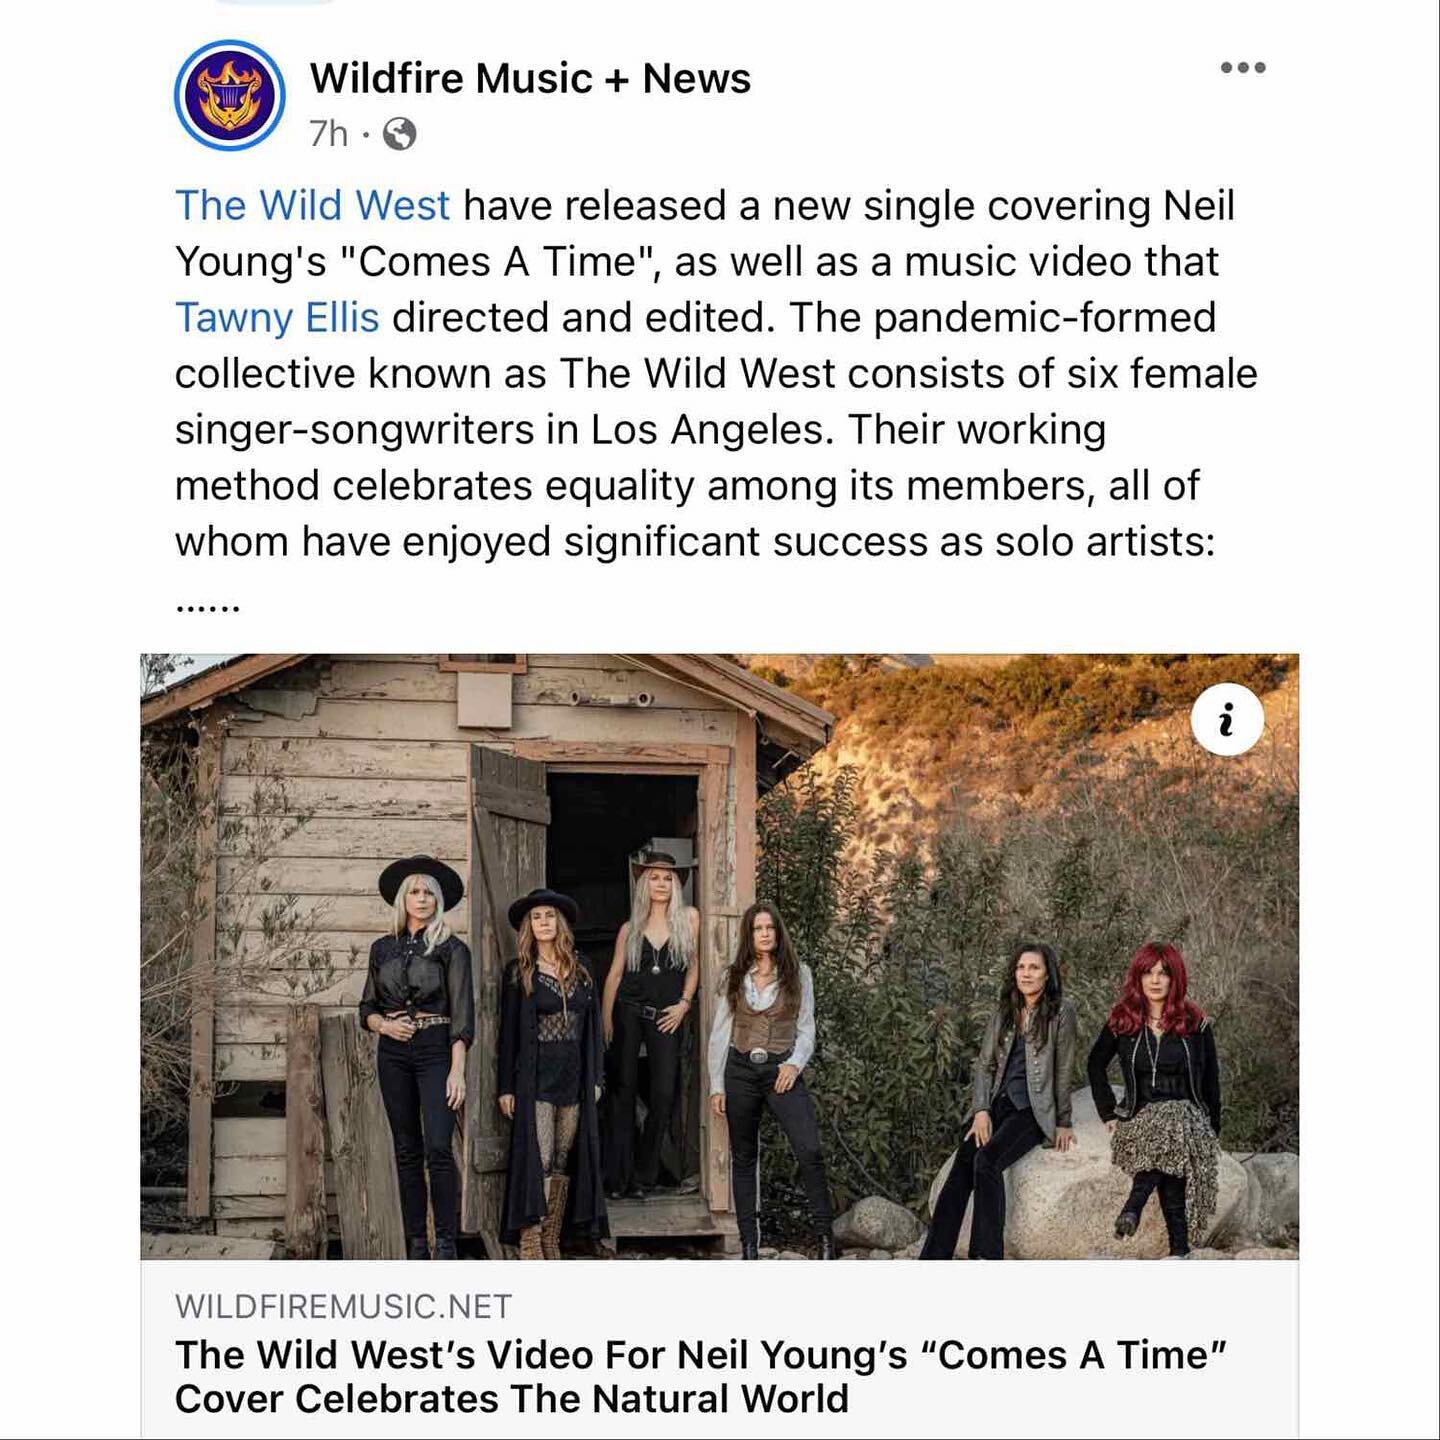 Wildfire Music + News features our new music video for &ldquo;Comes A Time&rdquo; directed by Tawny Ellis! ⤴️ link in bio

The Wild West have released a new single covering Neil Young&rsquo;s &ldquo;Comes A Time&rdquo;, as well as a music video that 